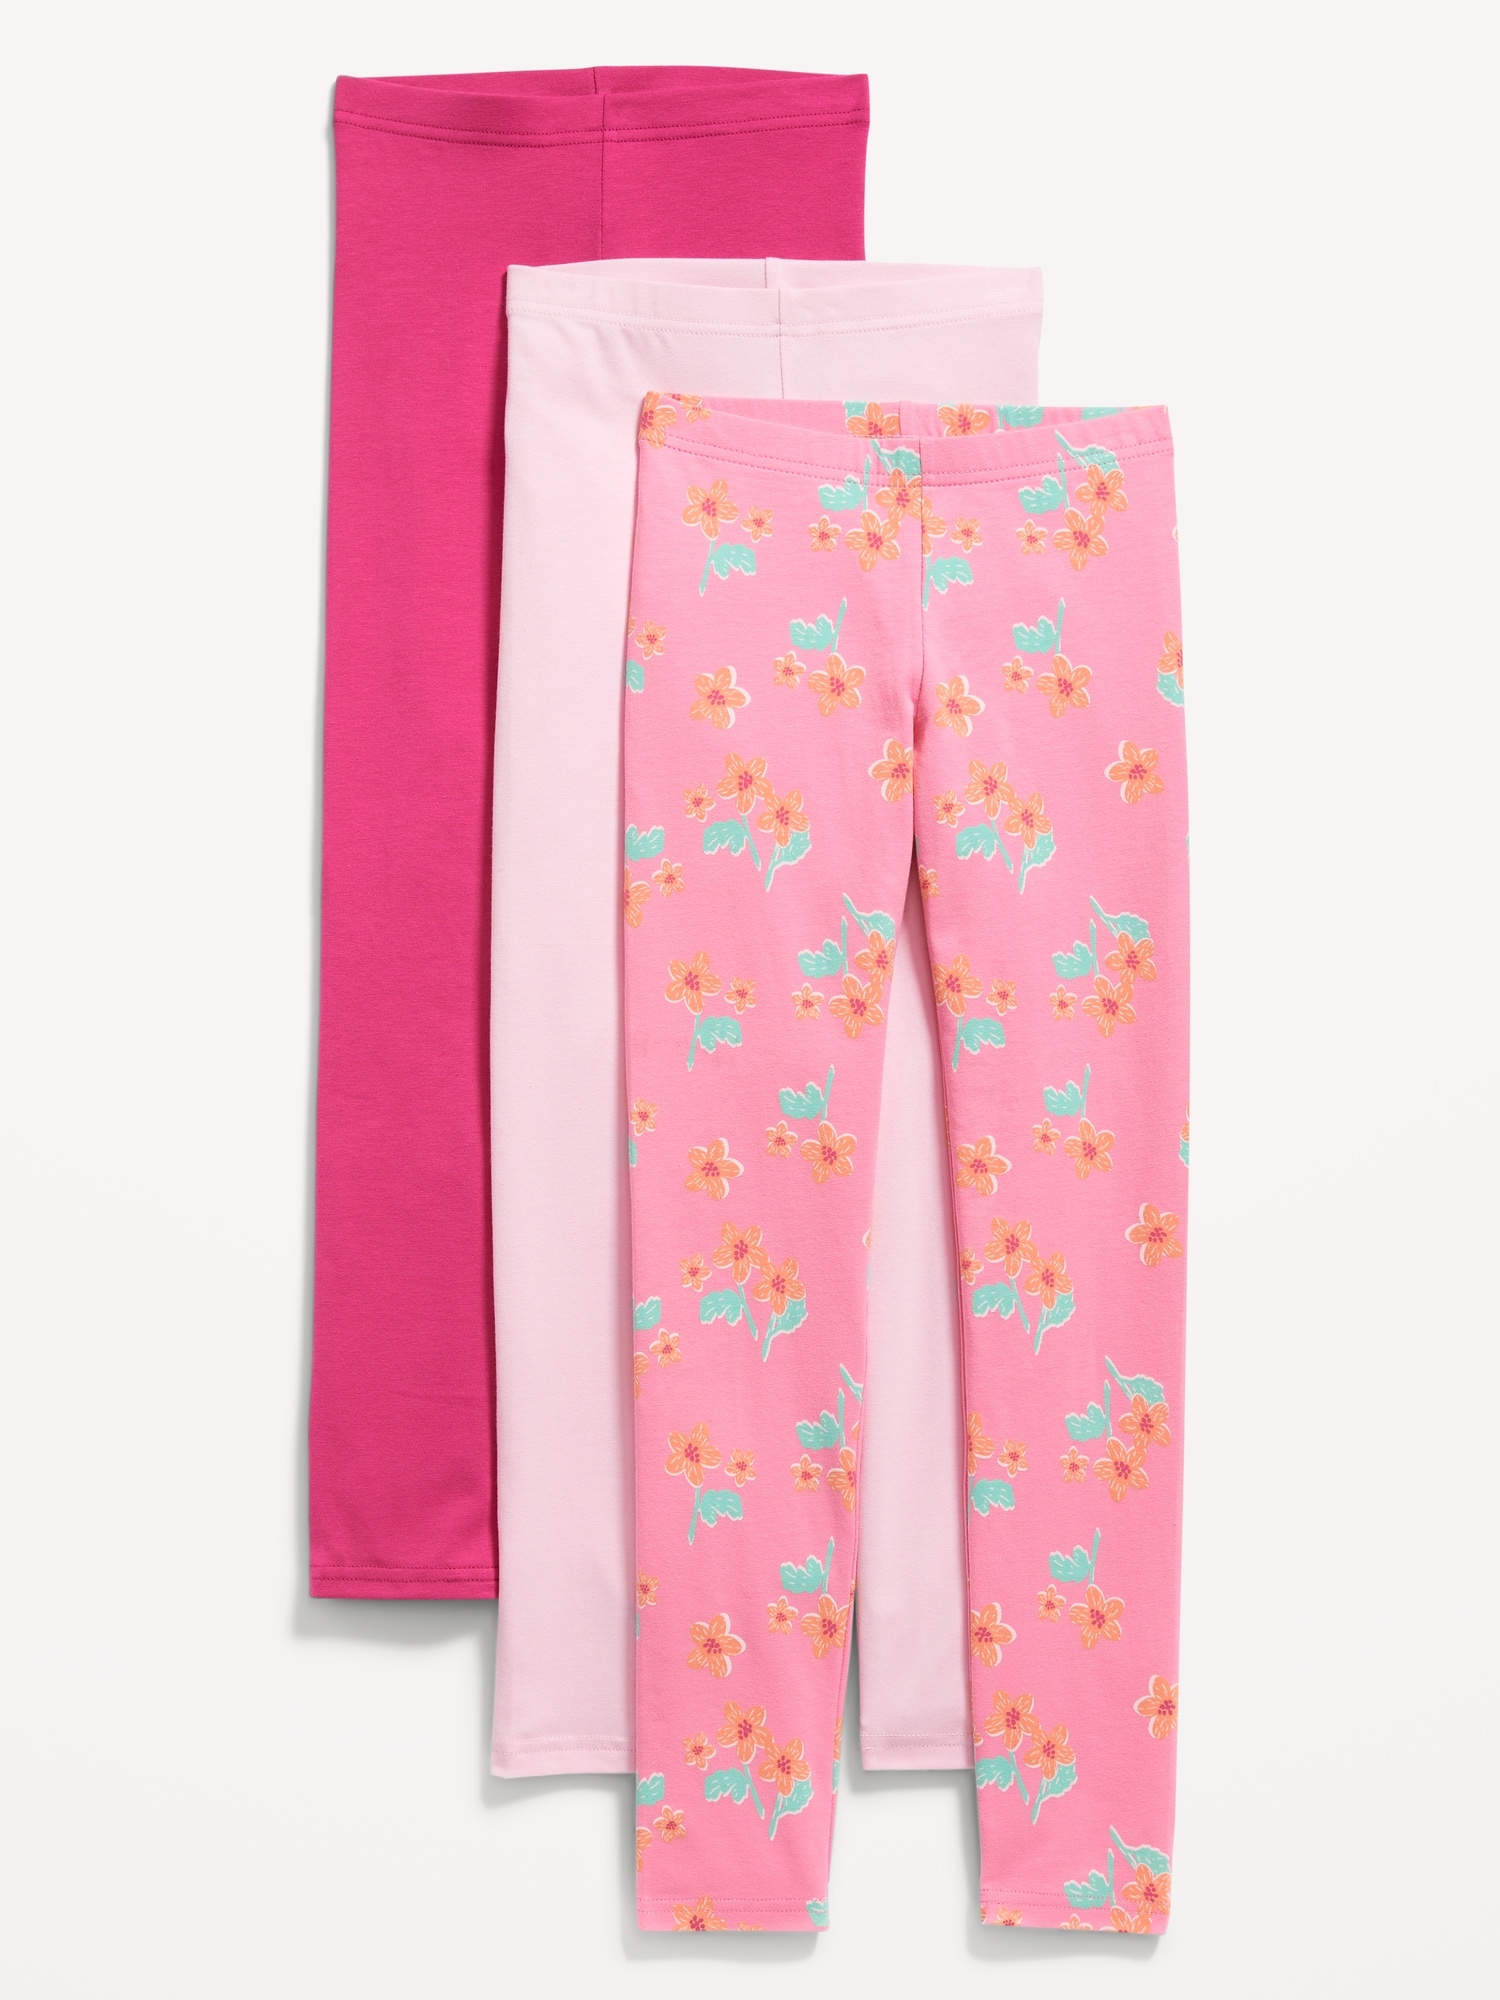 Old Navy: $5 Leggings for Women and Girls In-Store Today Only (Reg. $12.50)  + Nice Buys Online